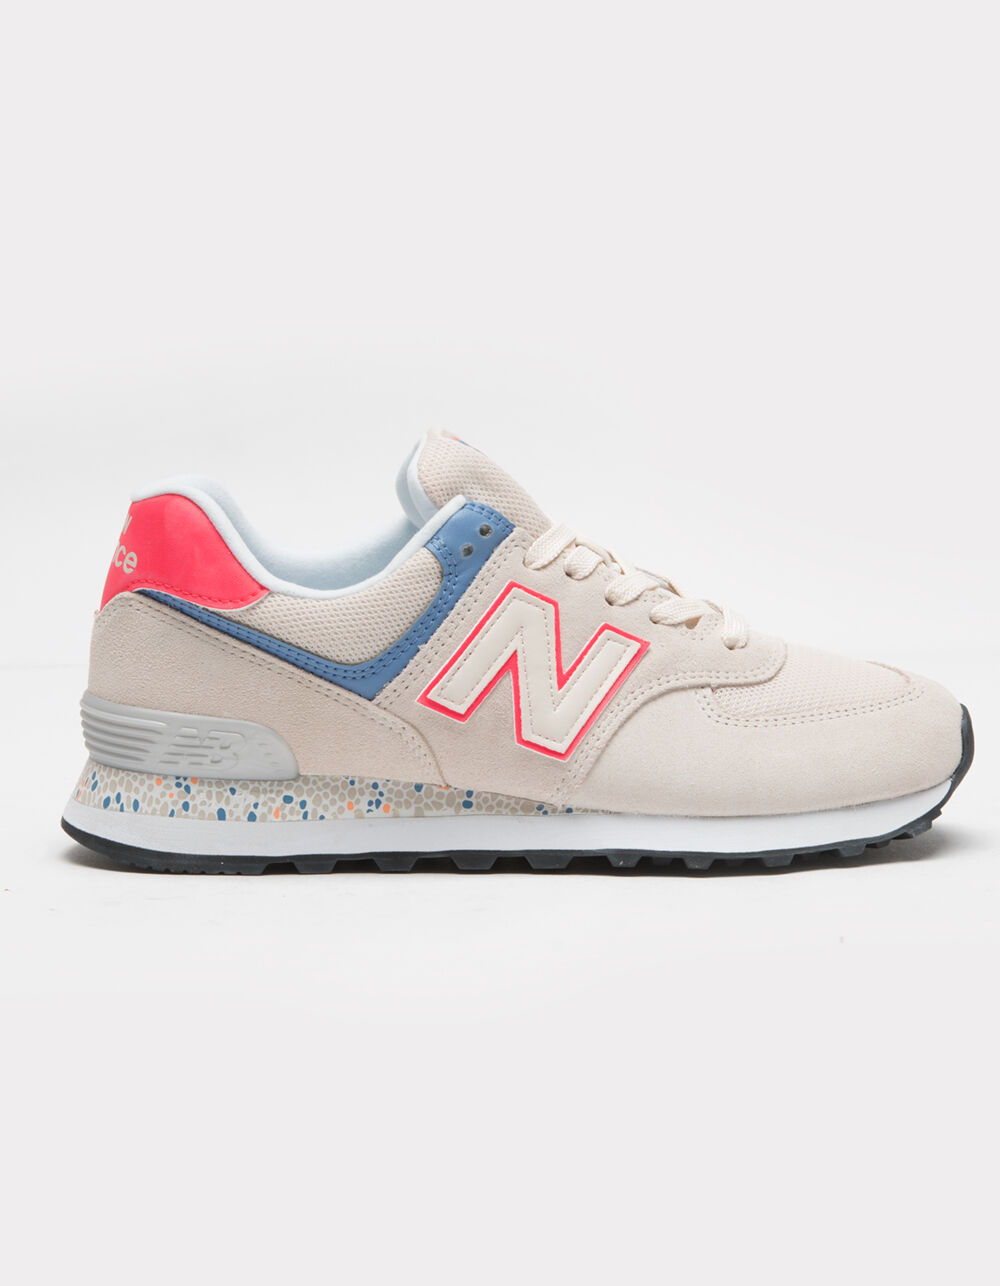 NEW BALANCE 574 Classics Womens Shoes - CORAL COMBO | Tillys